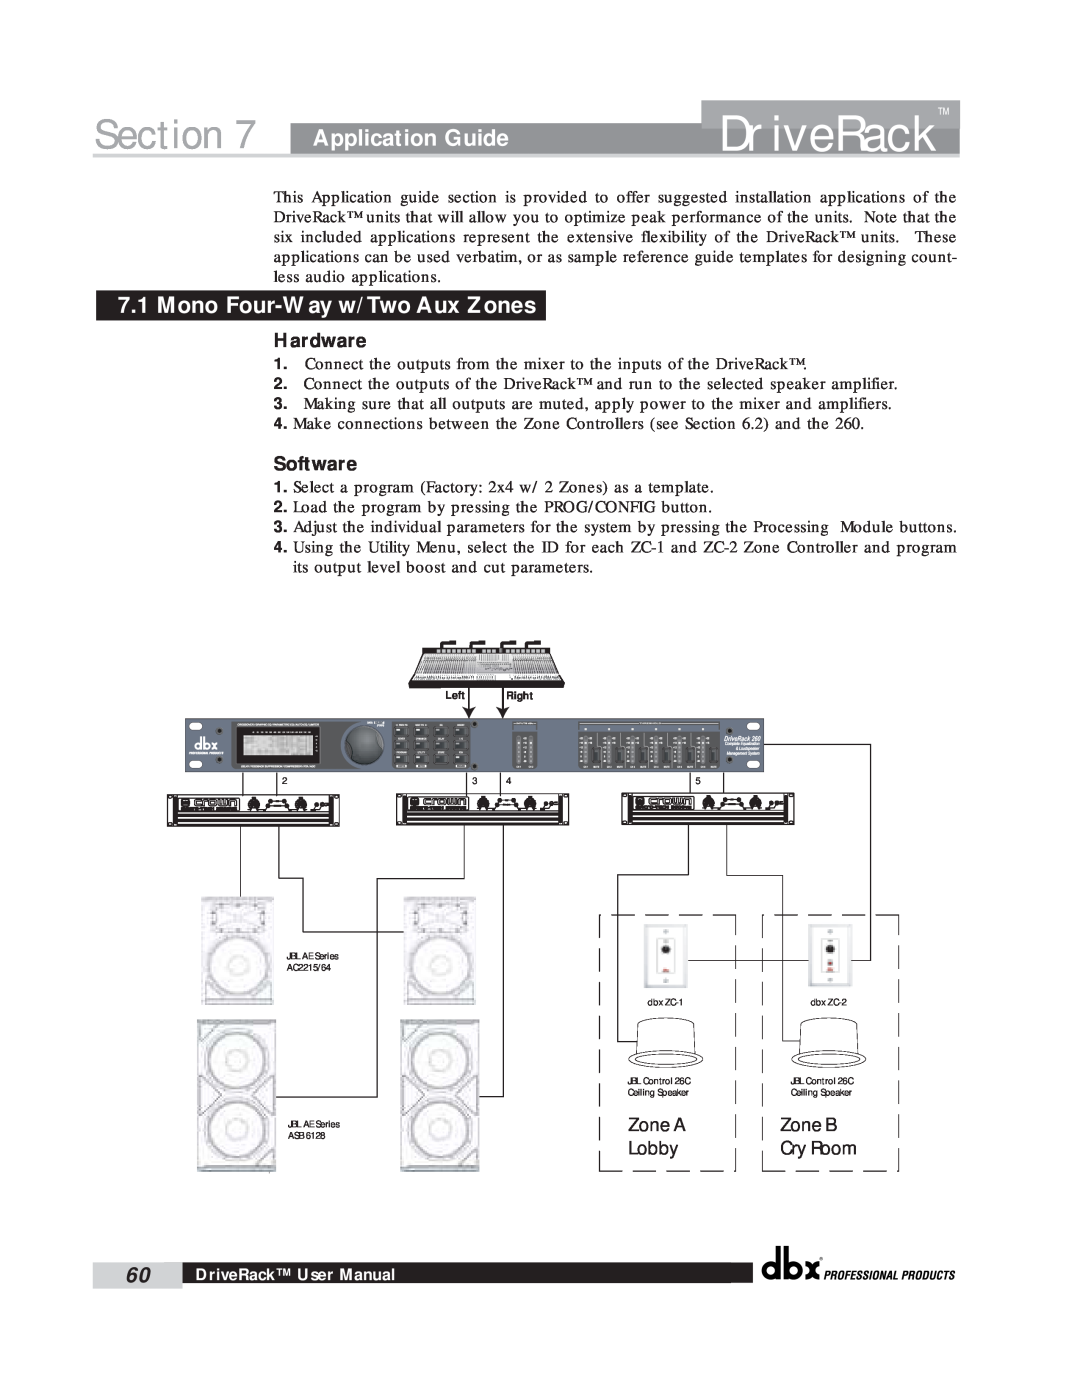 dbx Pro 260 user manual Application Guide, Mono Four-Wayw/ Two Aux Zones, Hardware, Software, Section, DriveRack, Cry Room 